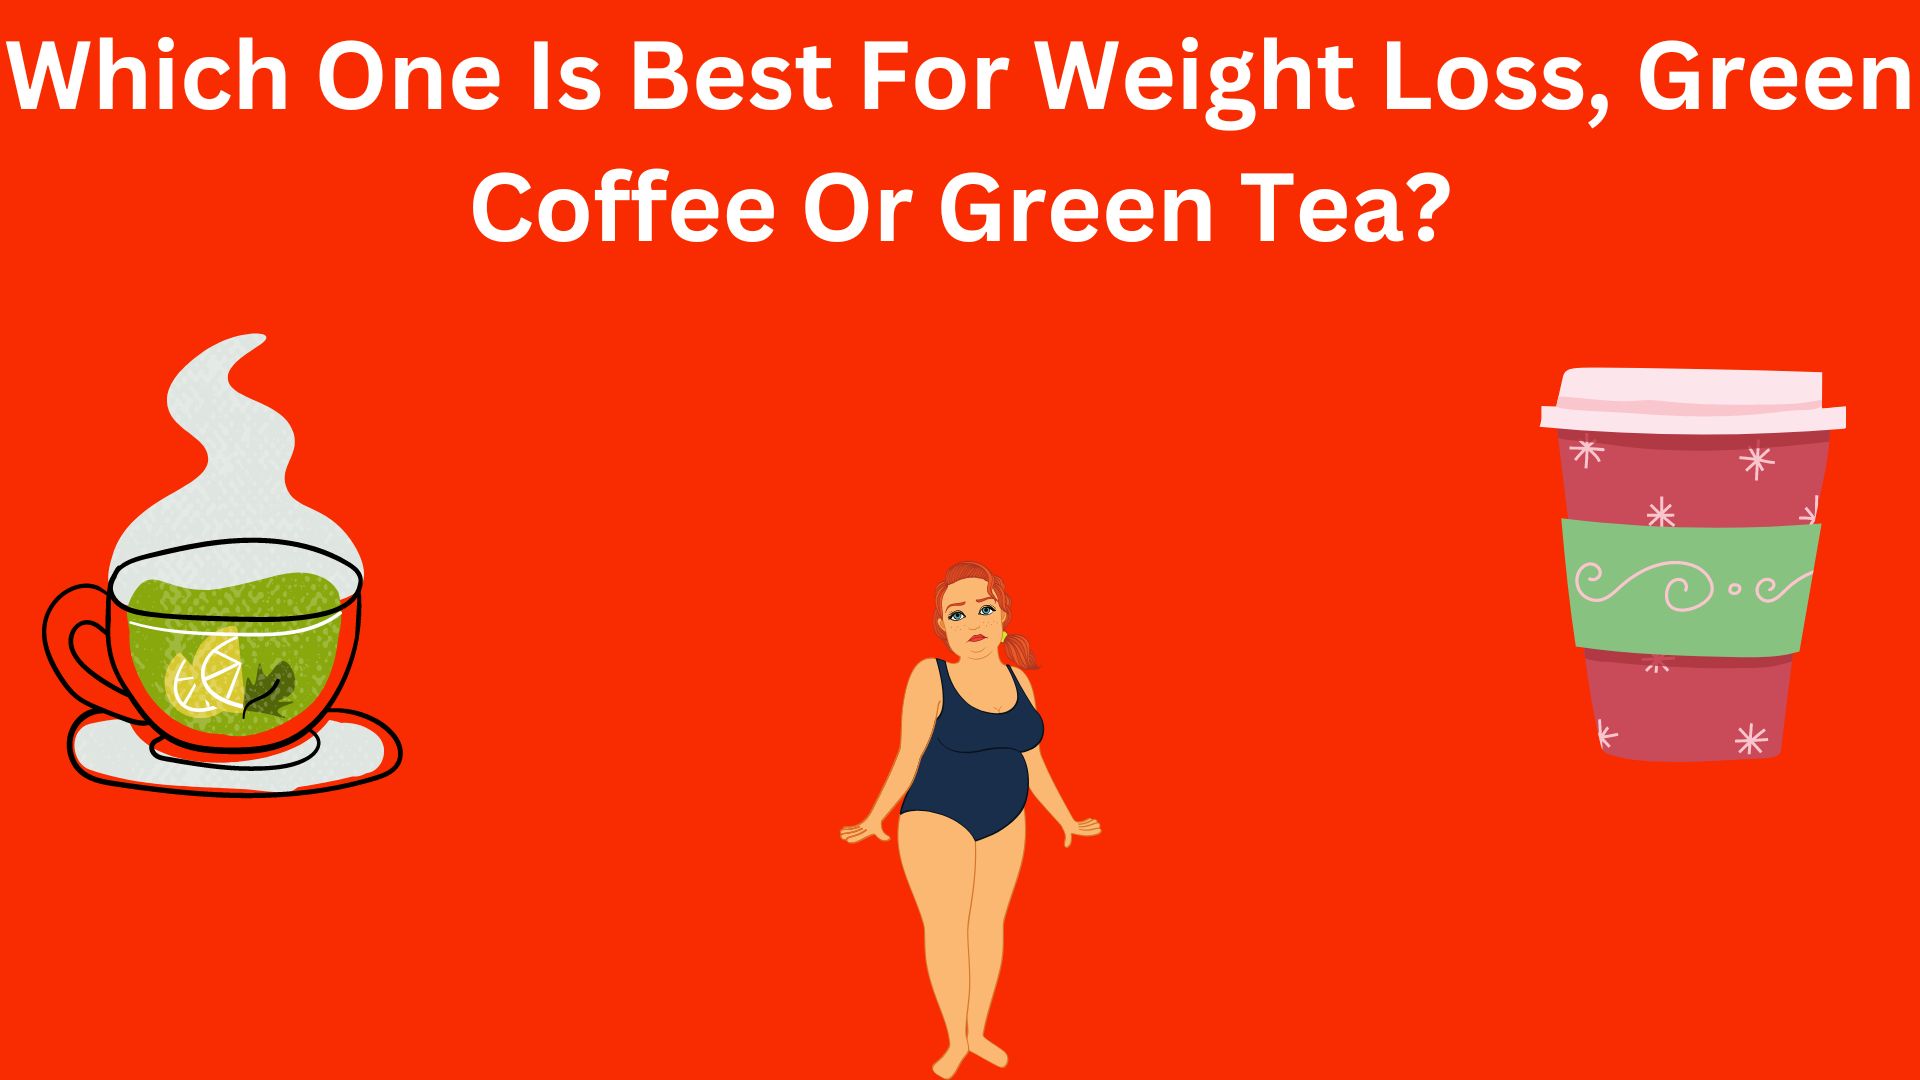 Which One Is Best For Weight Loss, Green Coffee Or Green Tea